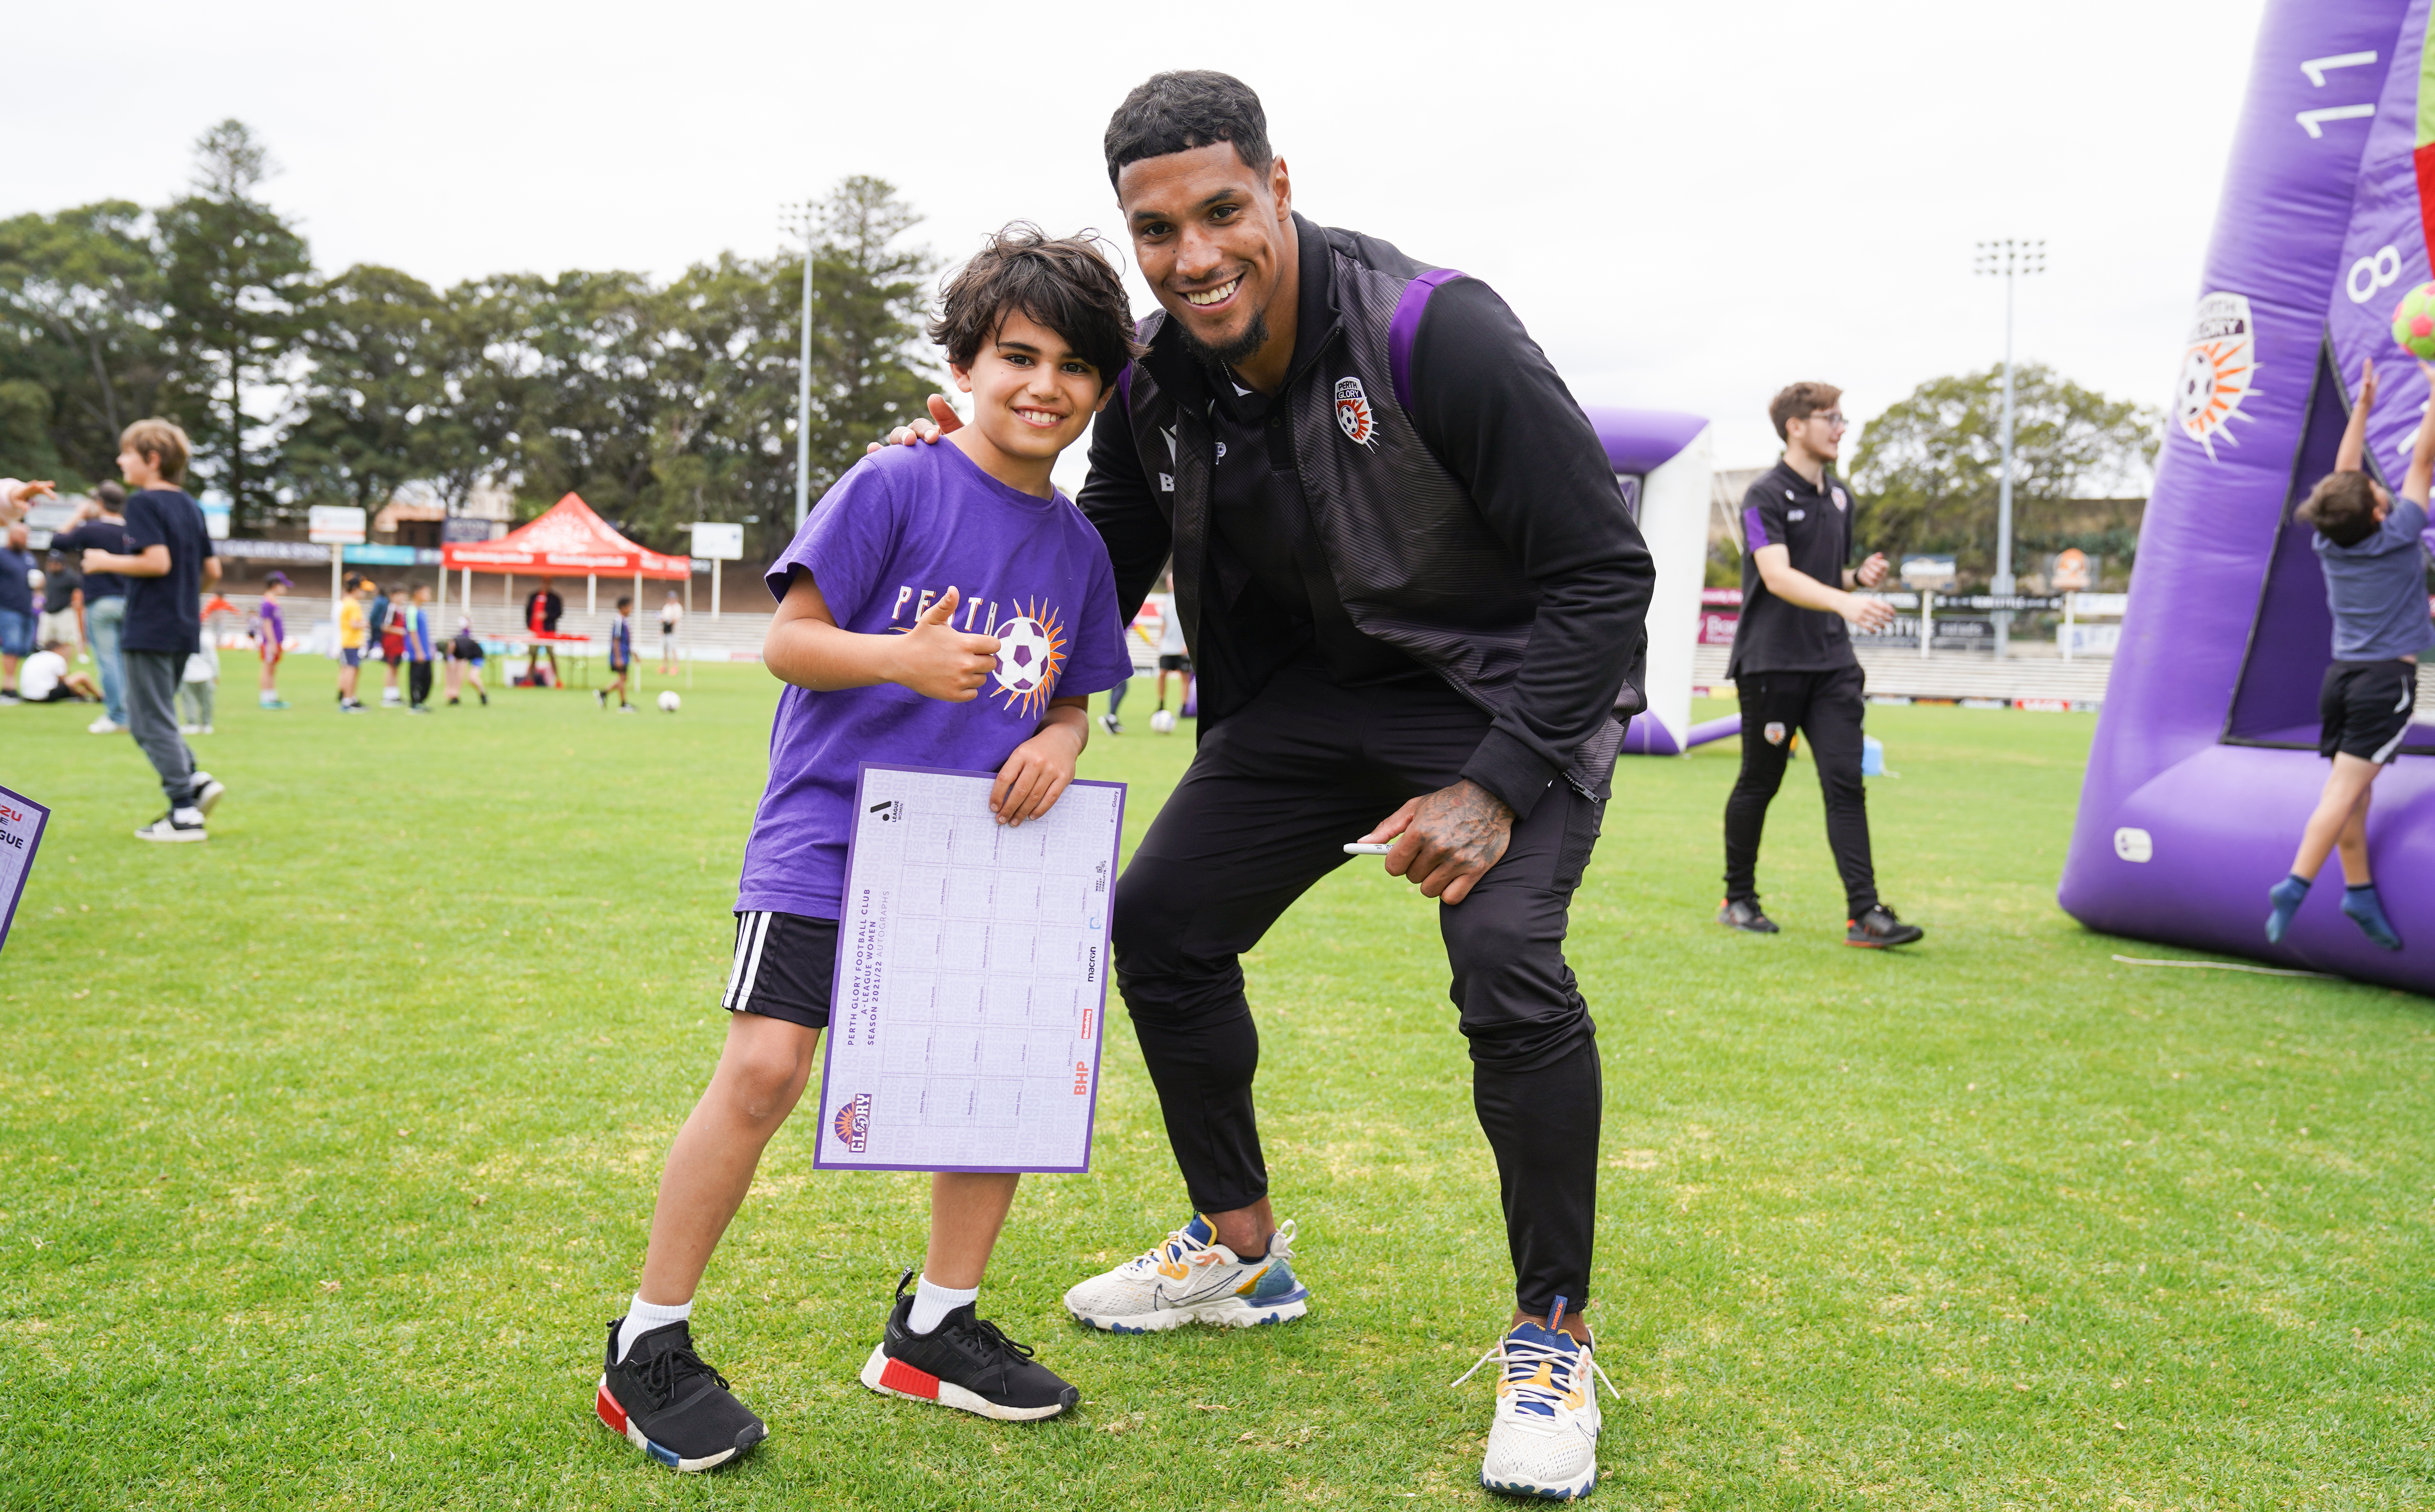 Don't miss our glorious Family Fun Day in Freo! - Perth Glory